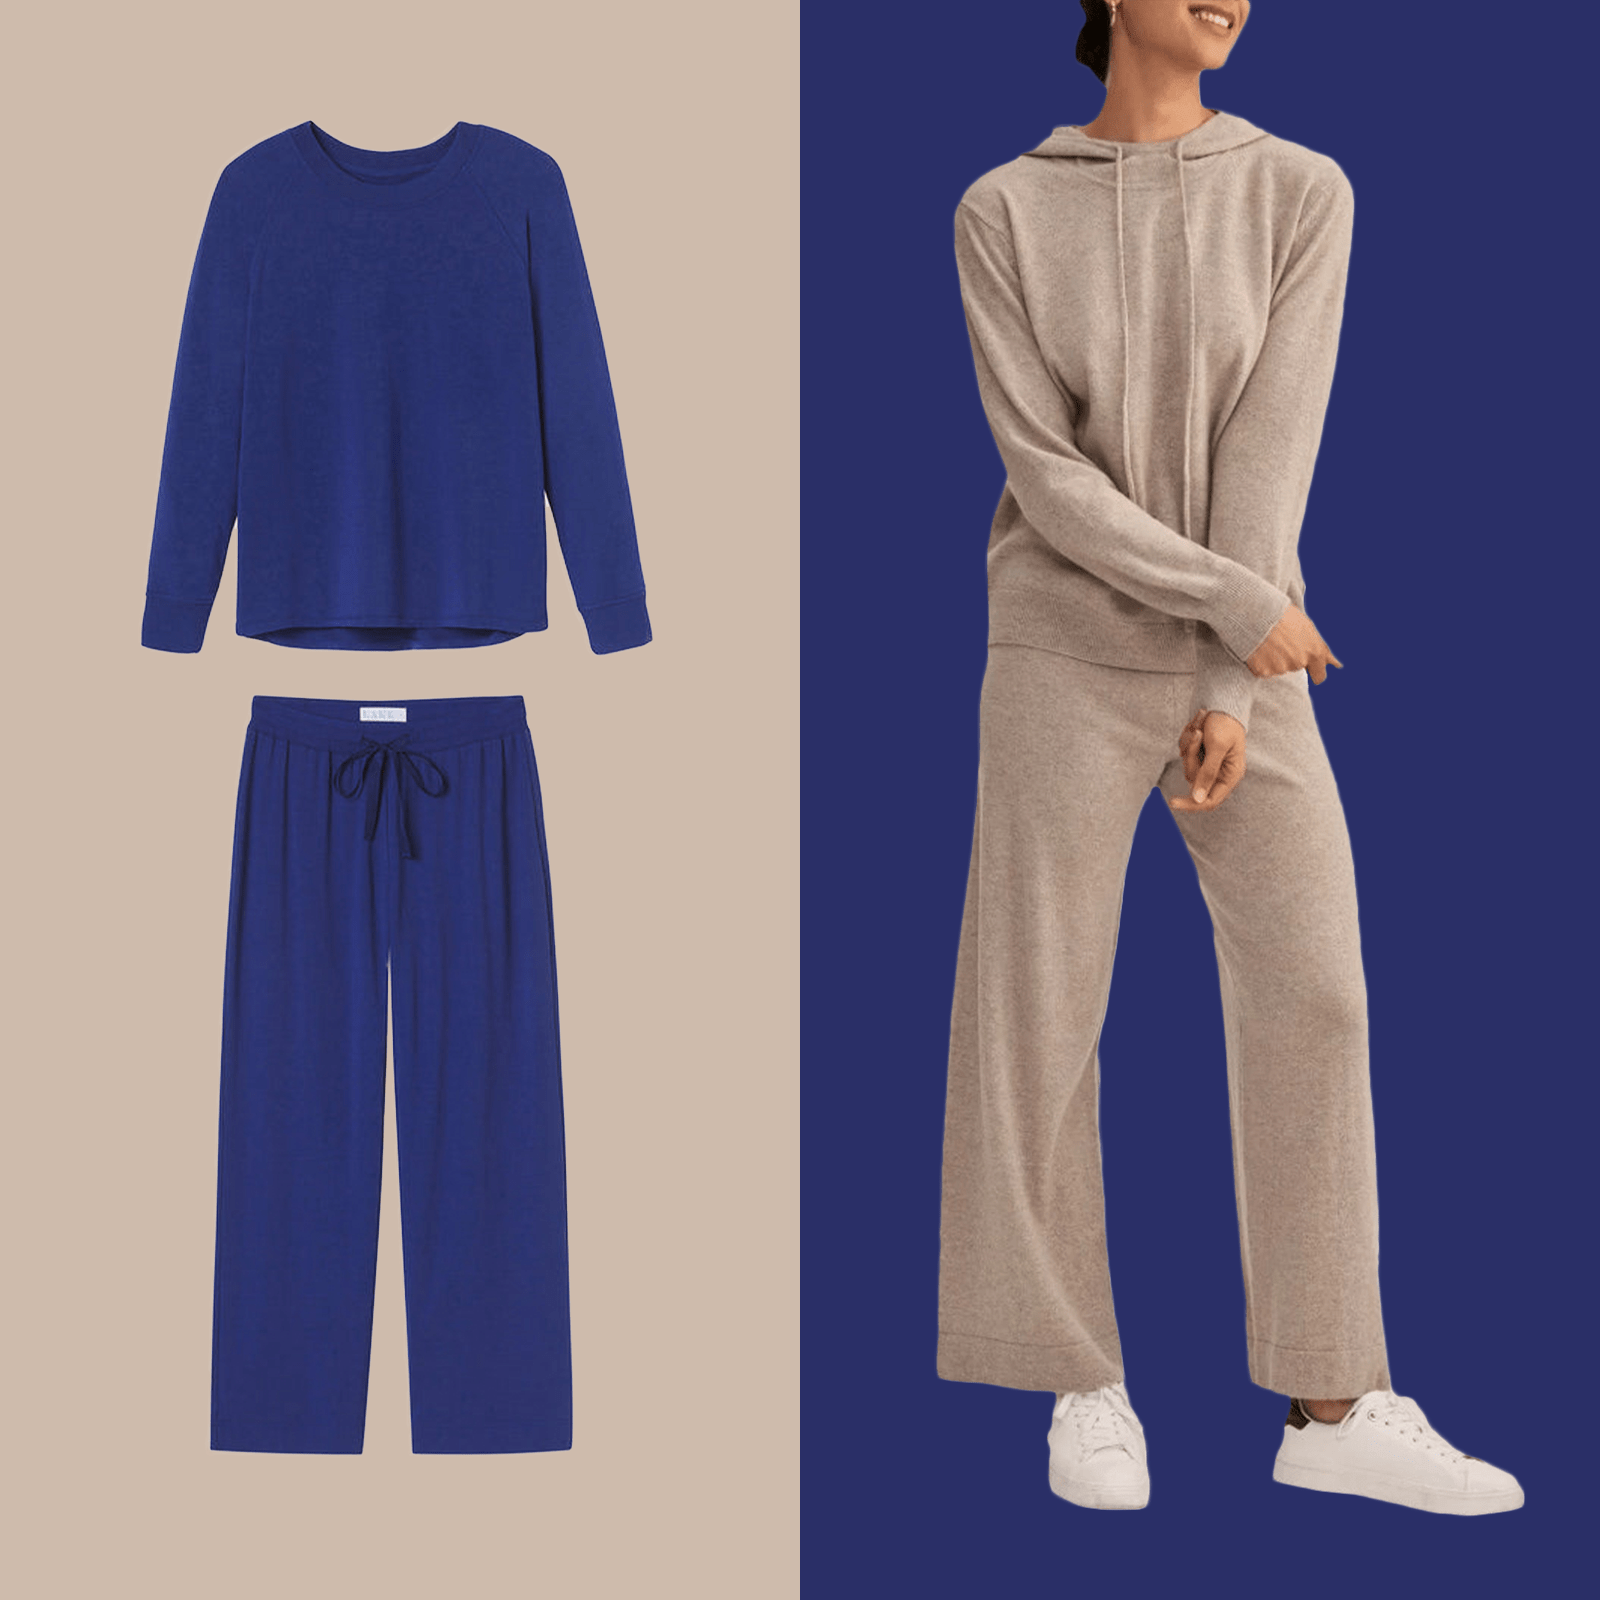 This is how I'll be dressing up my loungewear all season long